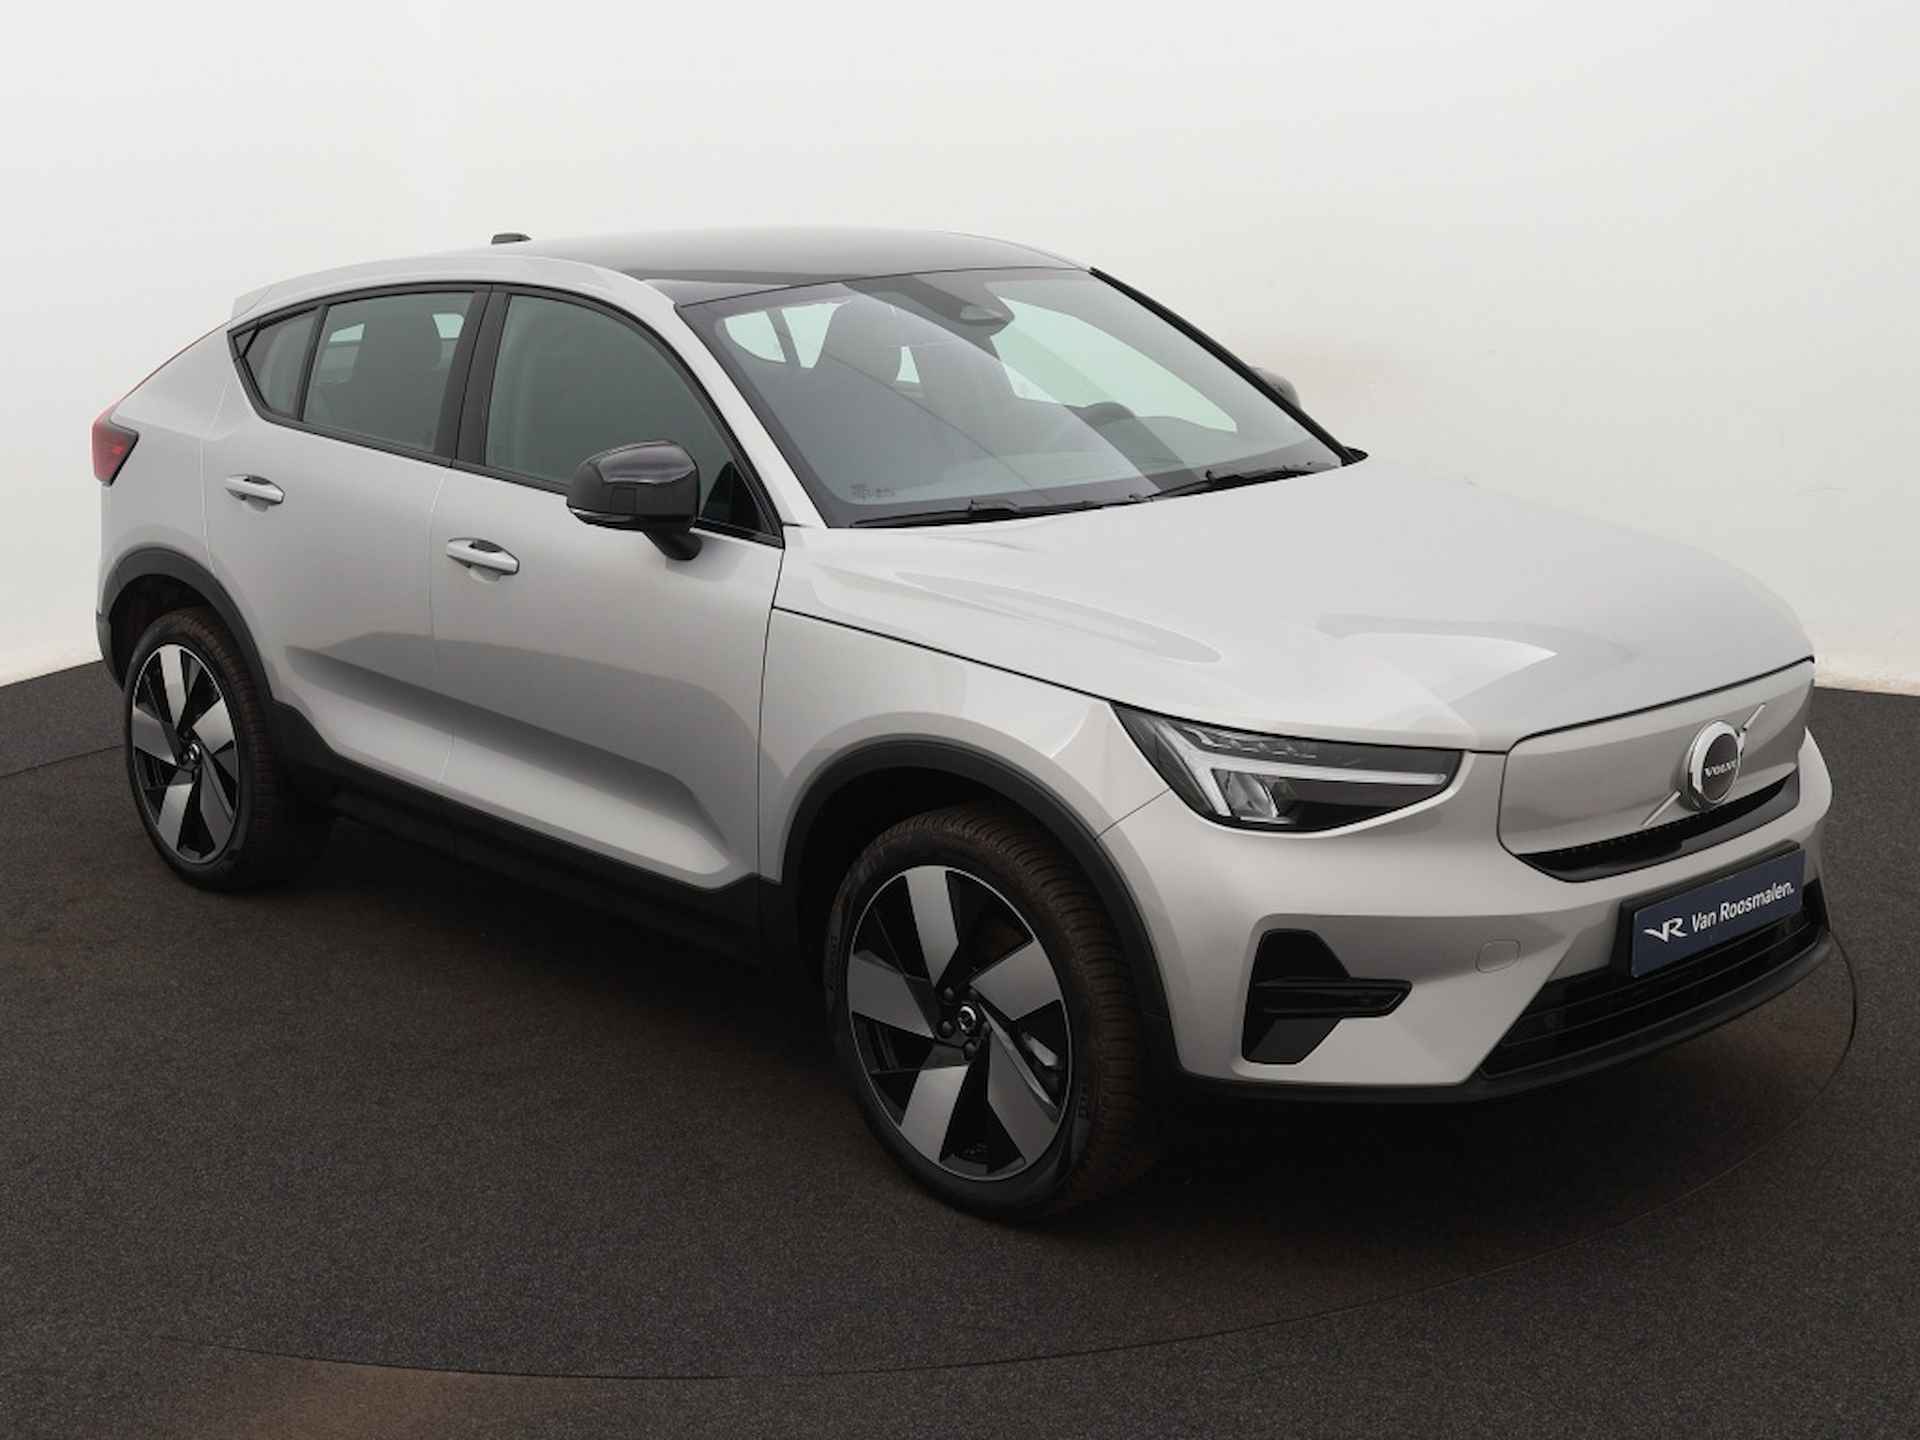 Volvo C40 Extended Plus 82 kWh - 8/38